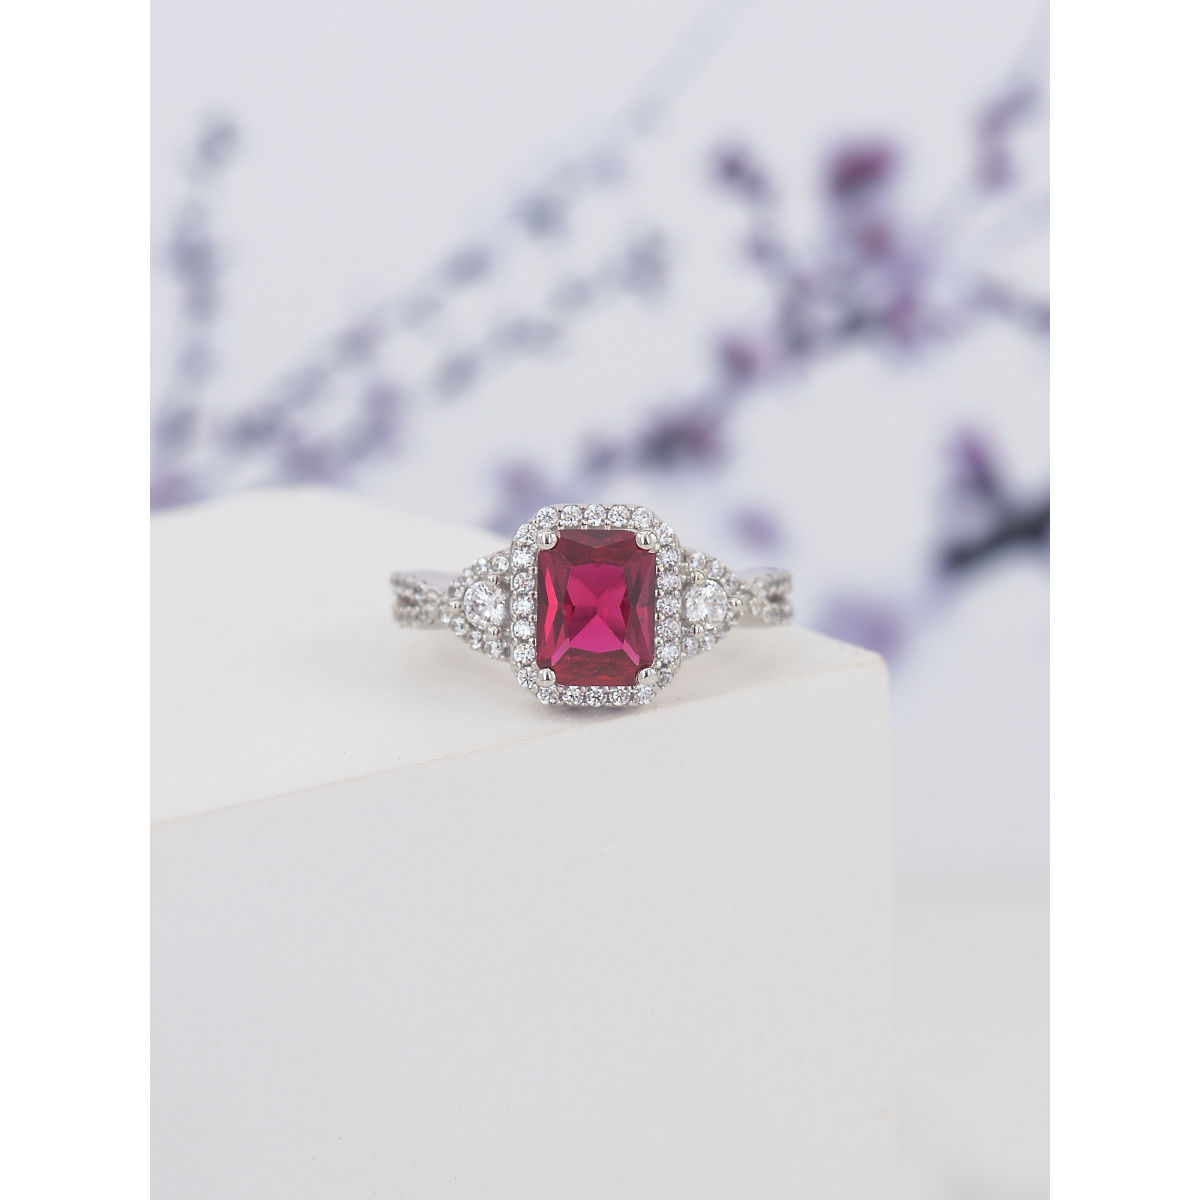 How to Care For Ruby Engagement Rings? | Vintage Diamond Ring